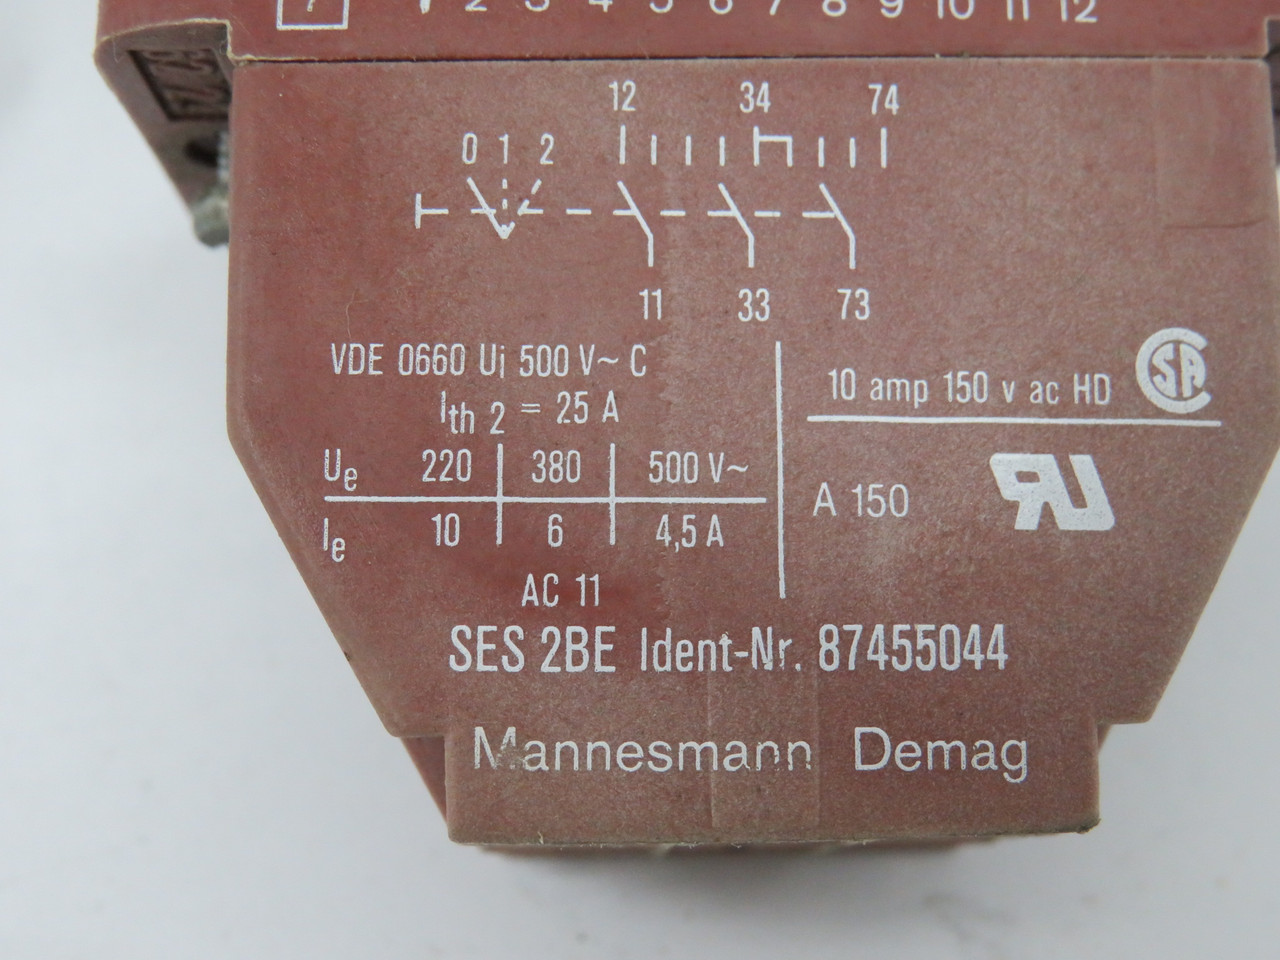 Mannesmann Demag 87455044 SES2BE Pushbutton Contact Block Brown *COS DMG* USED